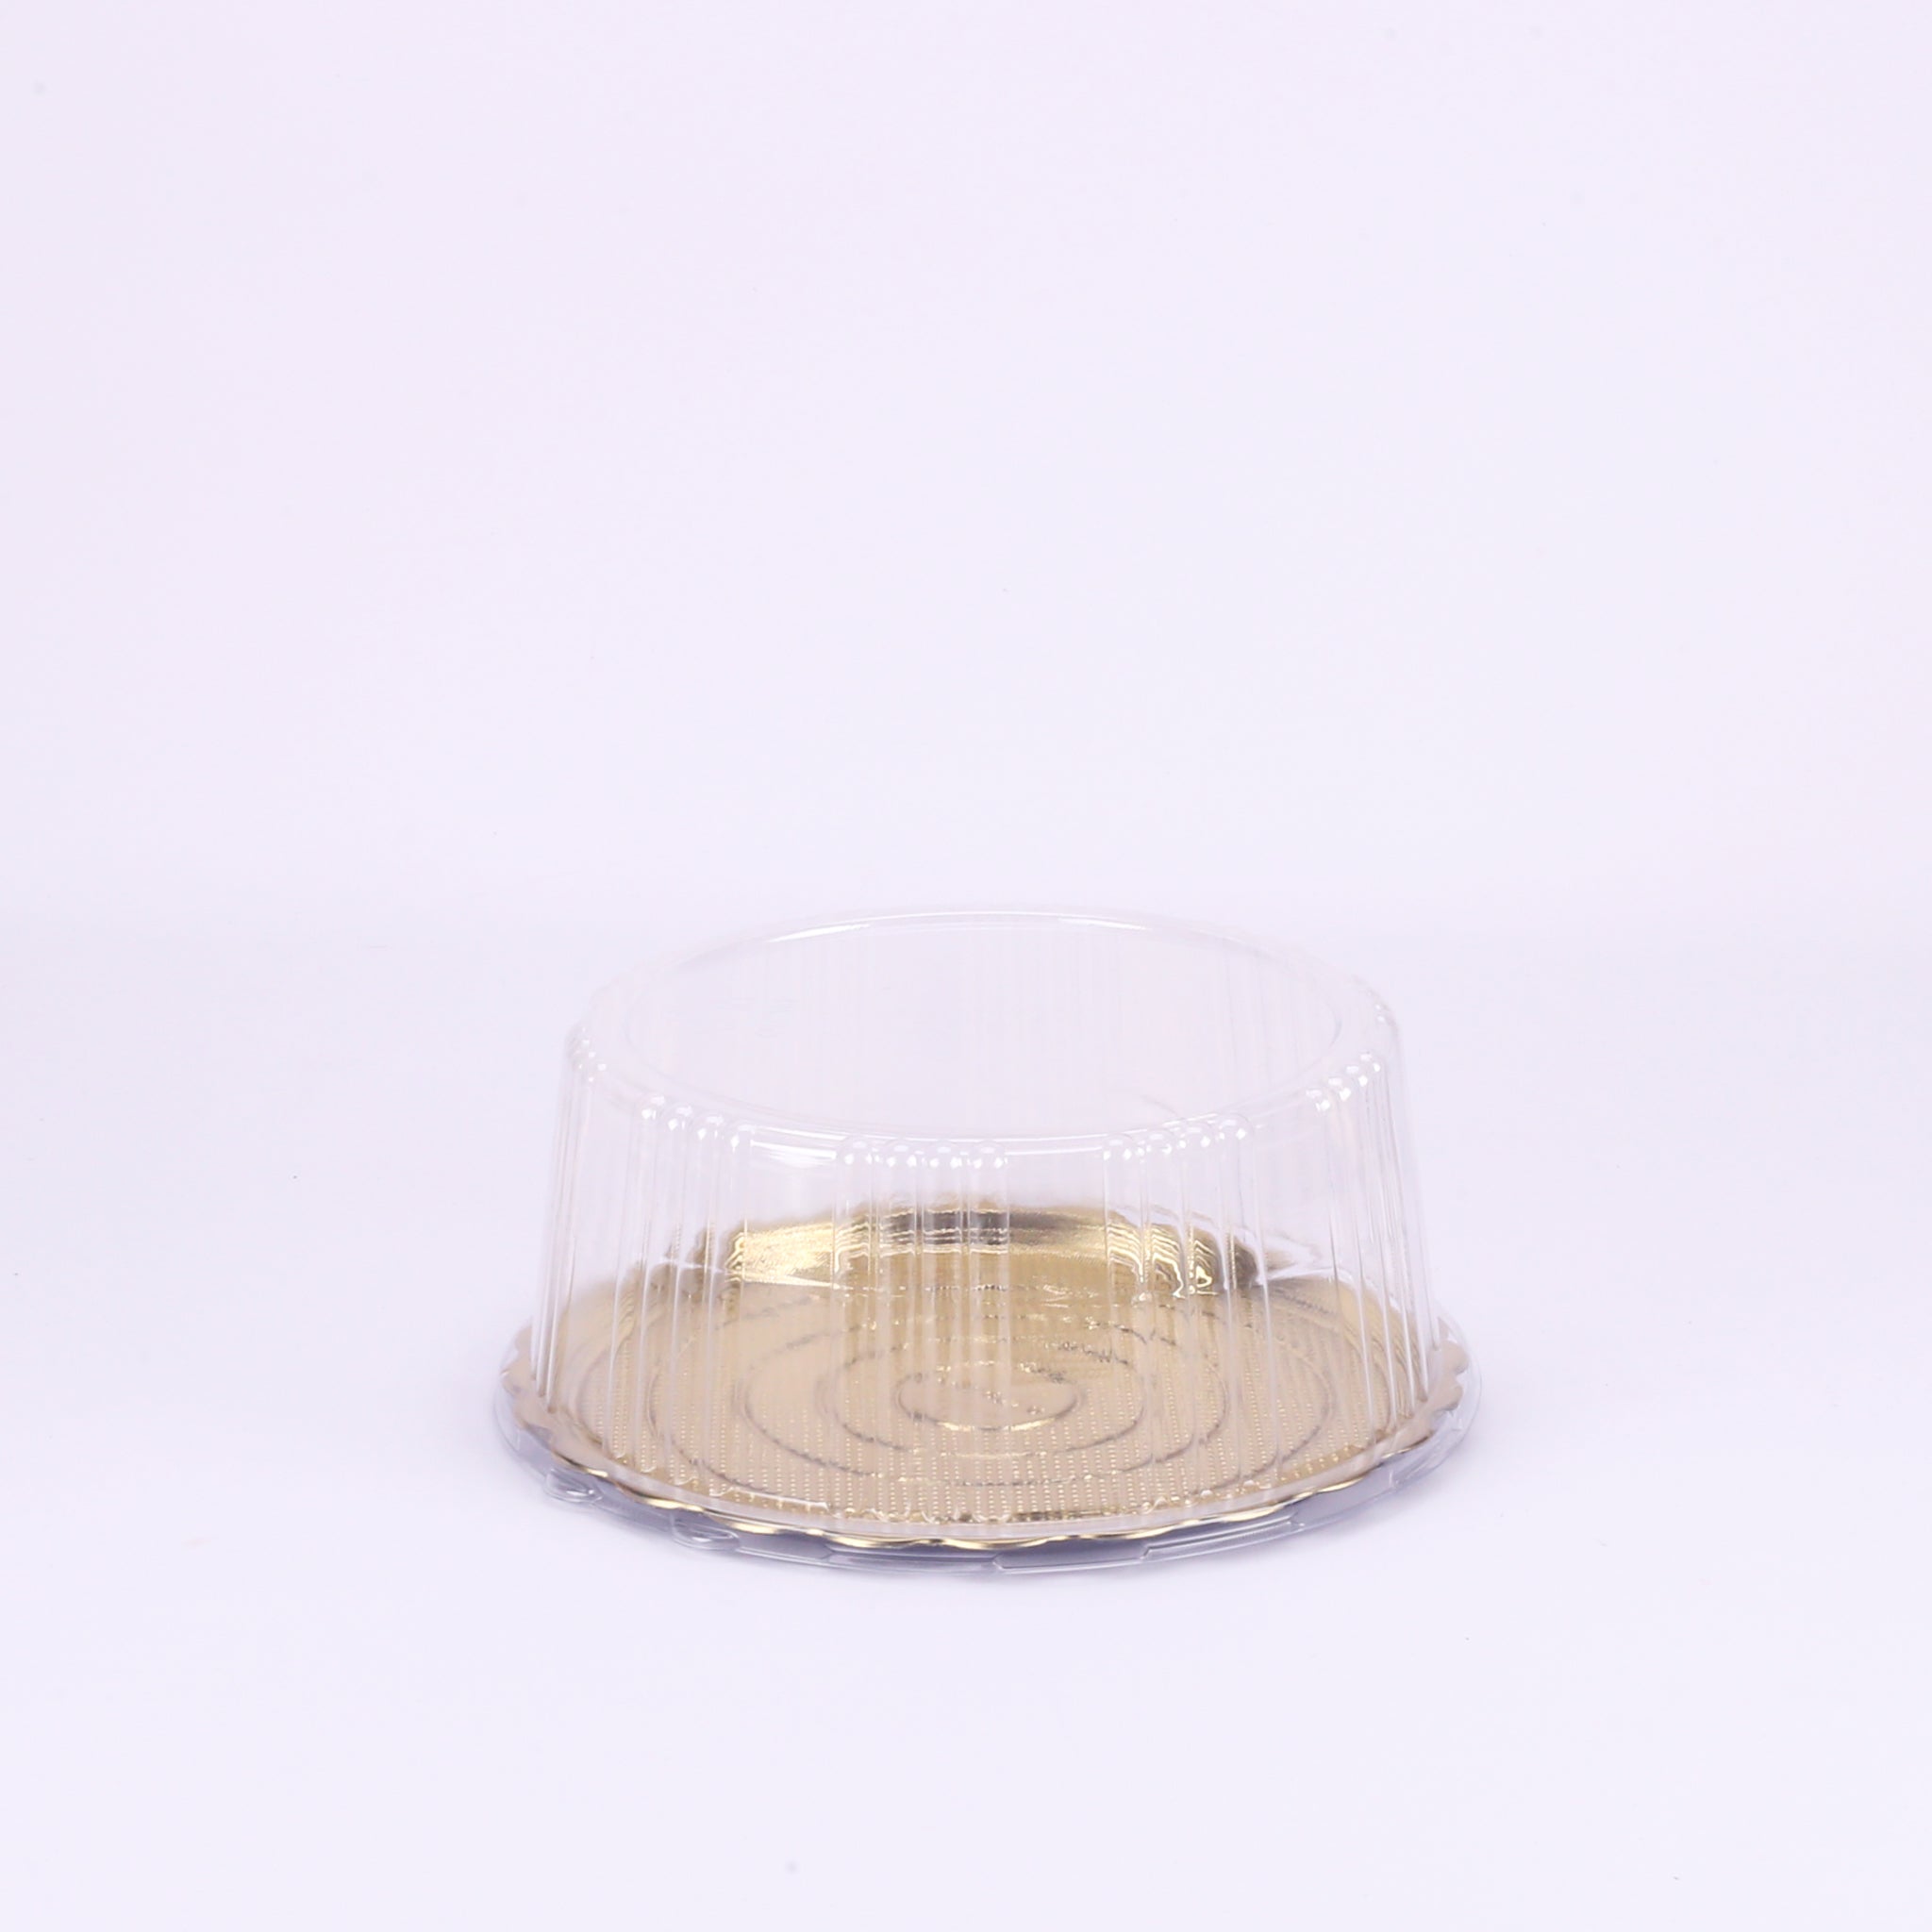 50 pieces Gold Base Round Cake Container - 25 cm